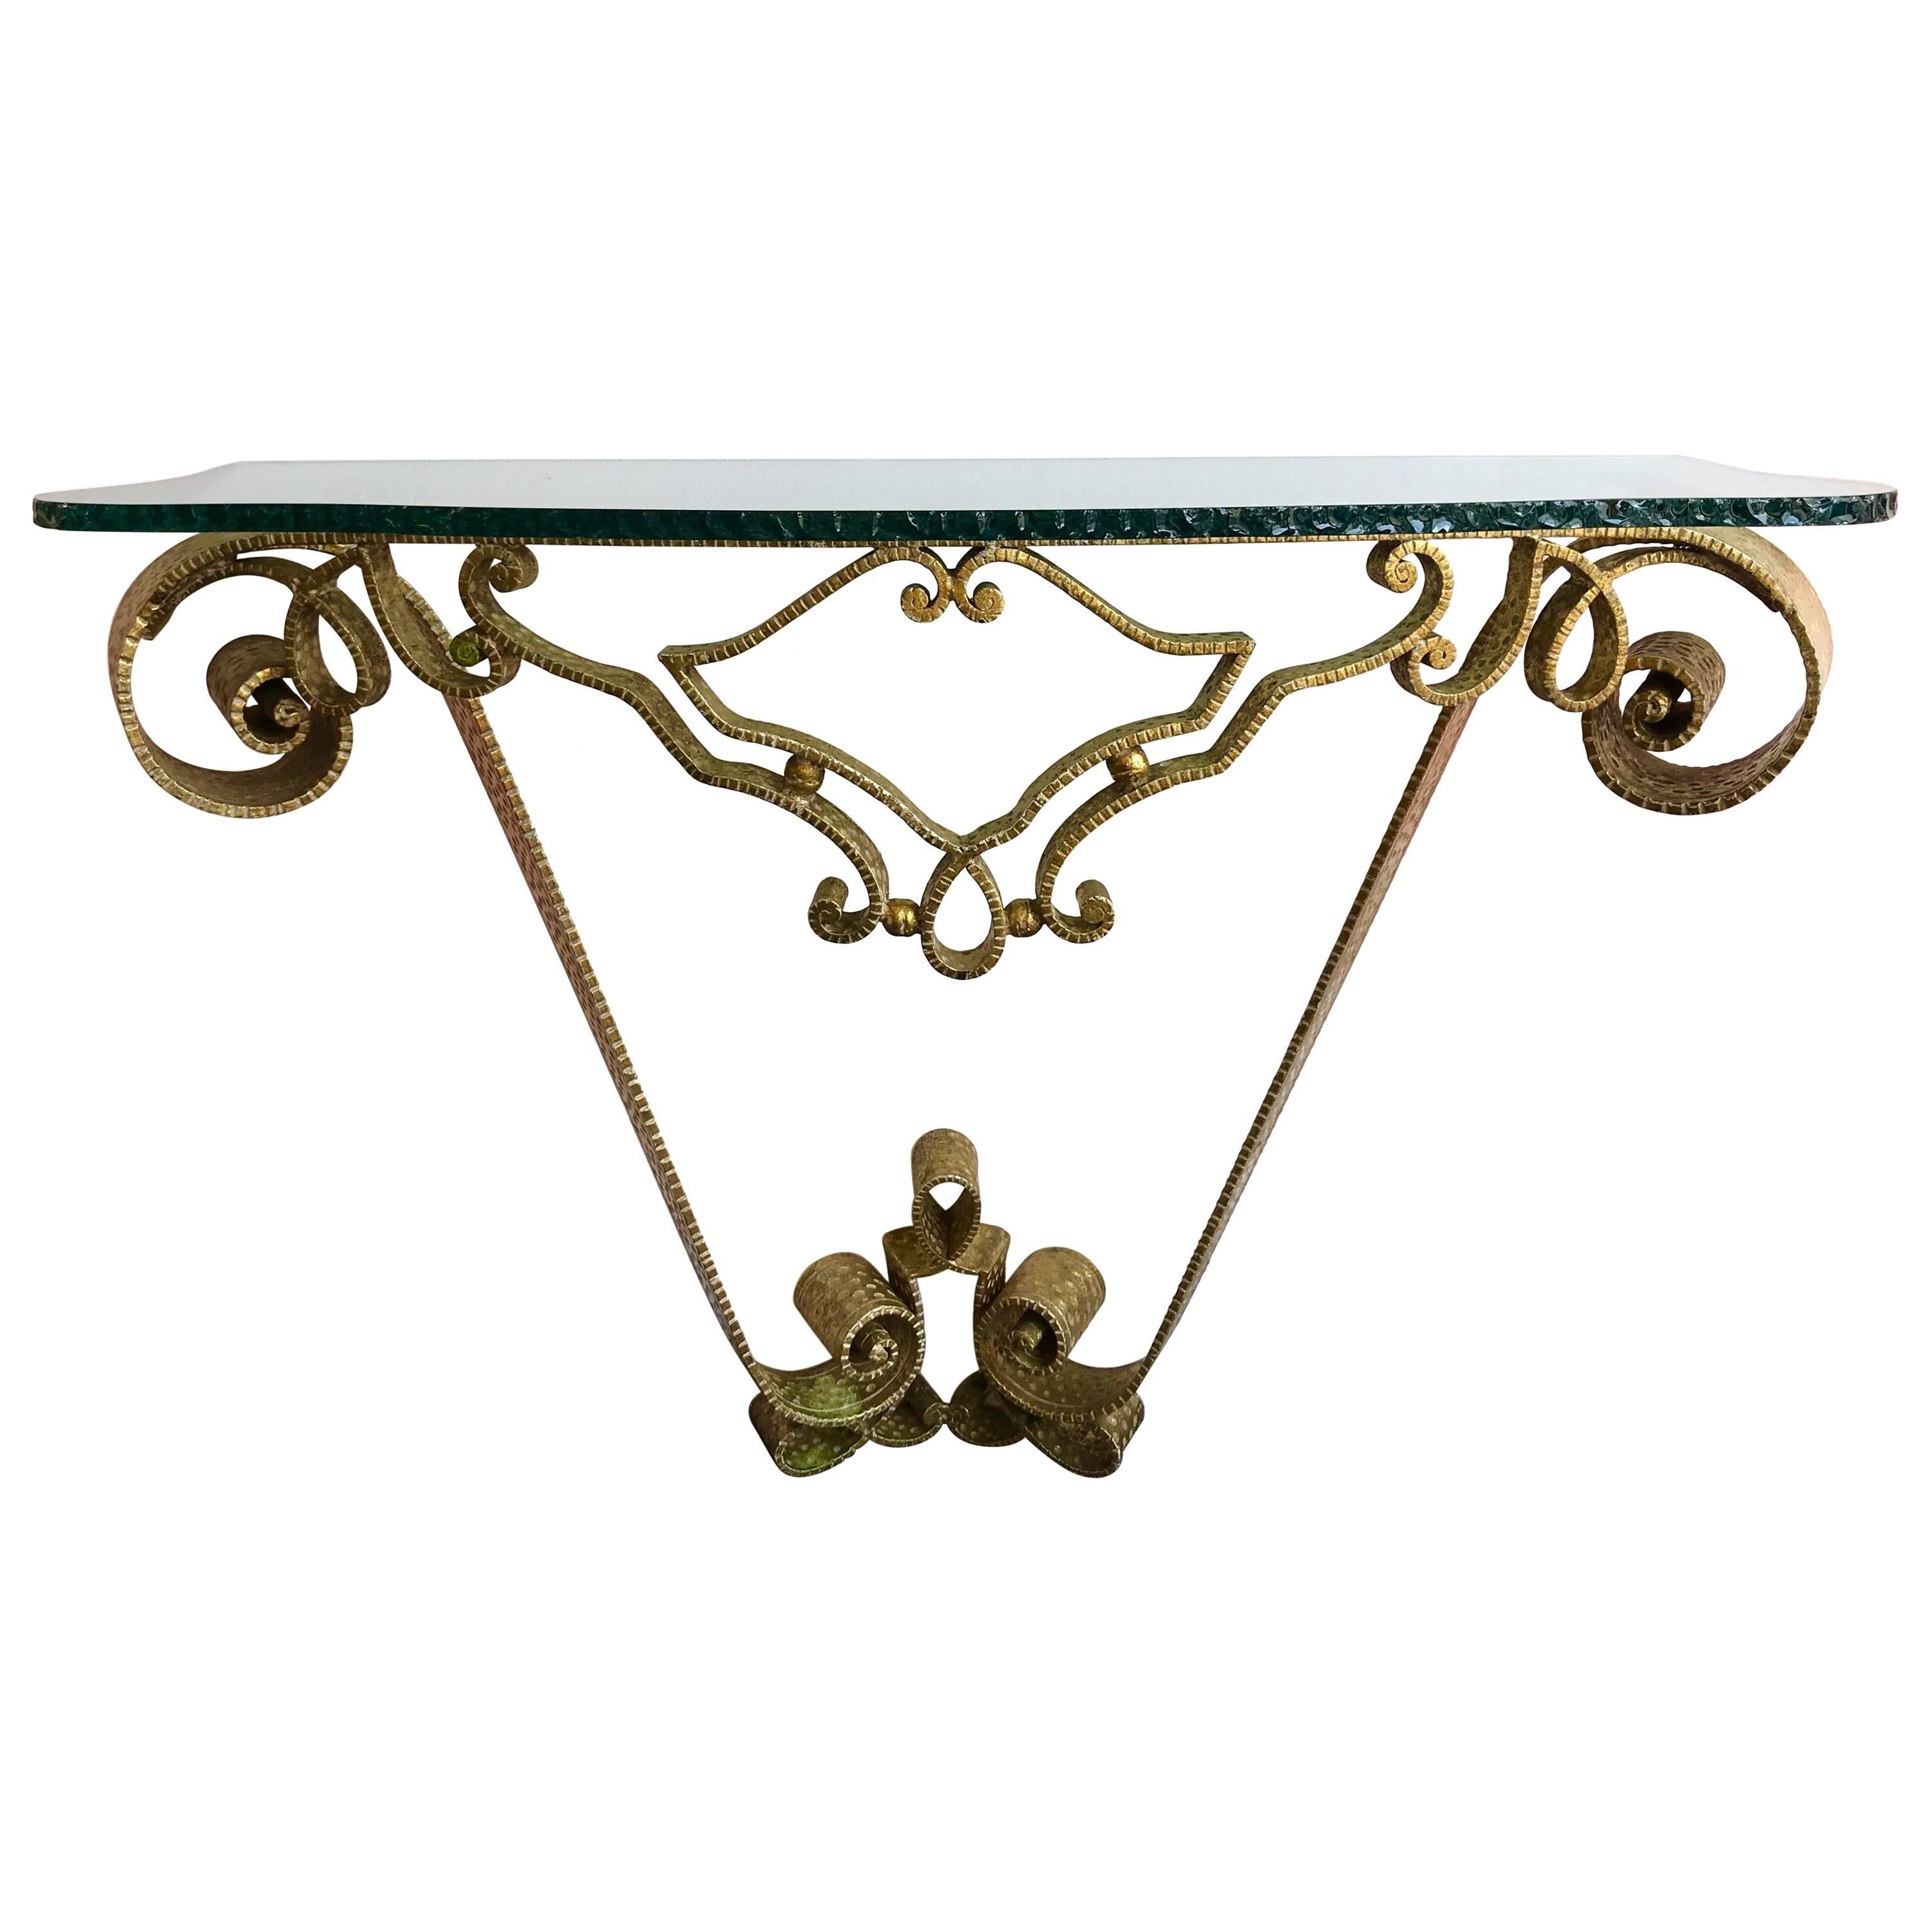 Console Wrought Iron Gold Leaf by Pier Luigi Colli, Italy, 1950s